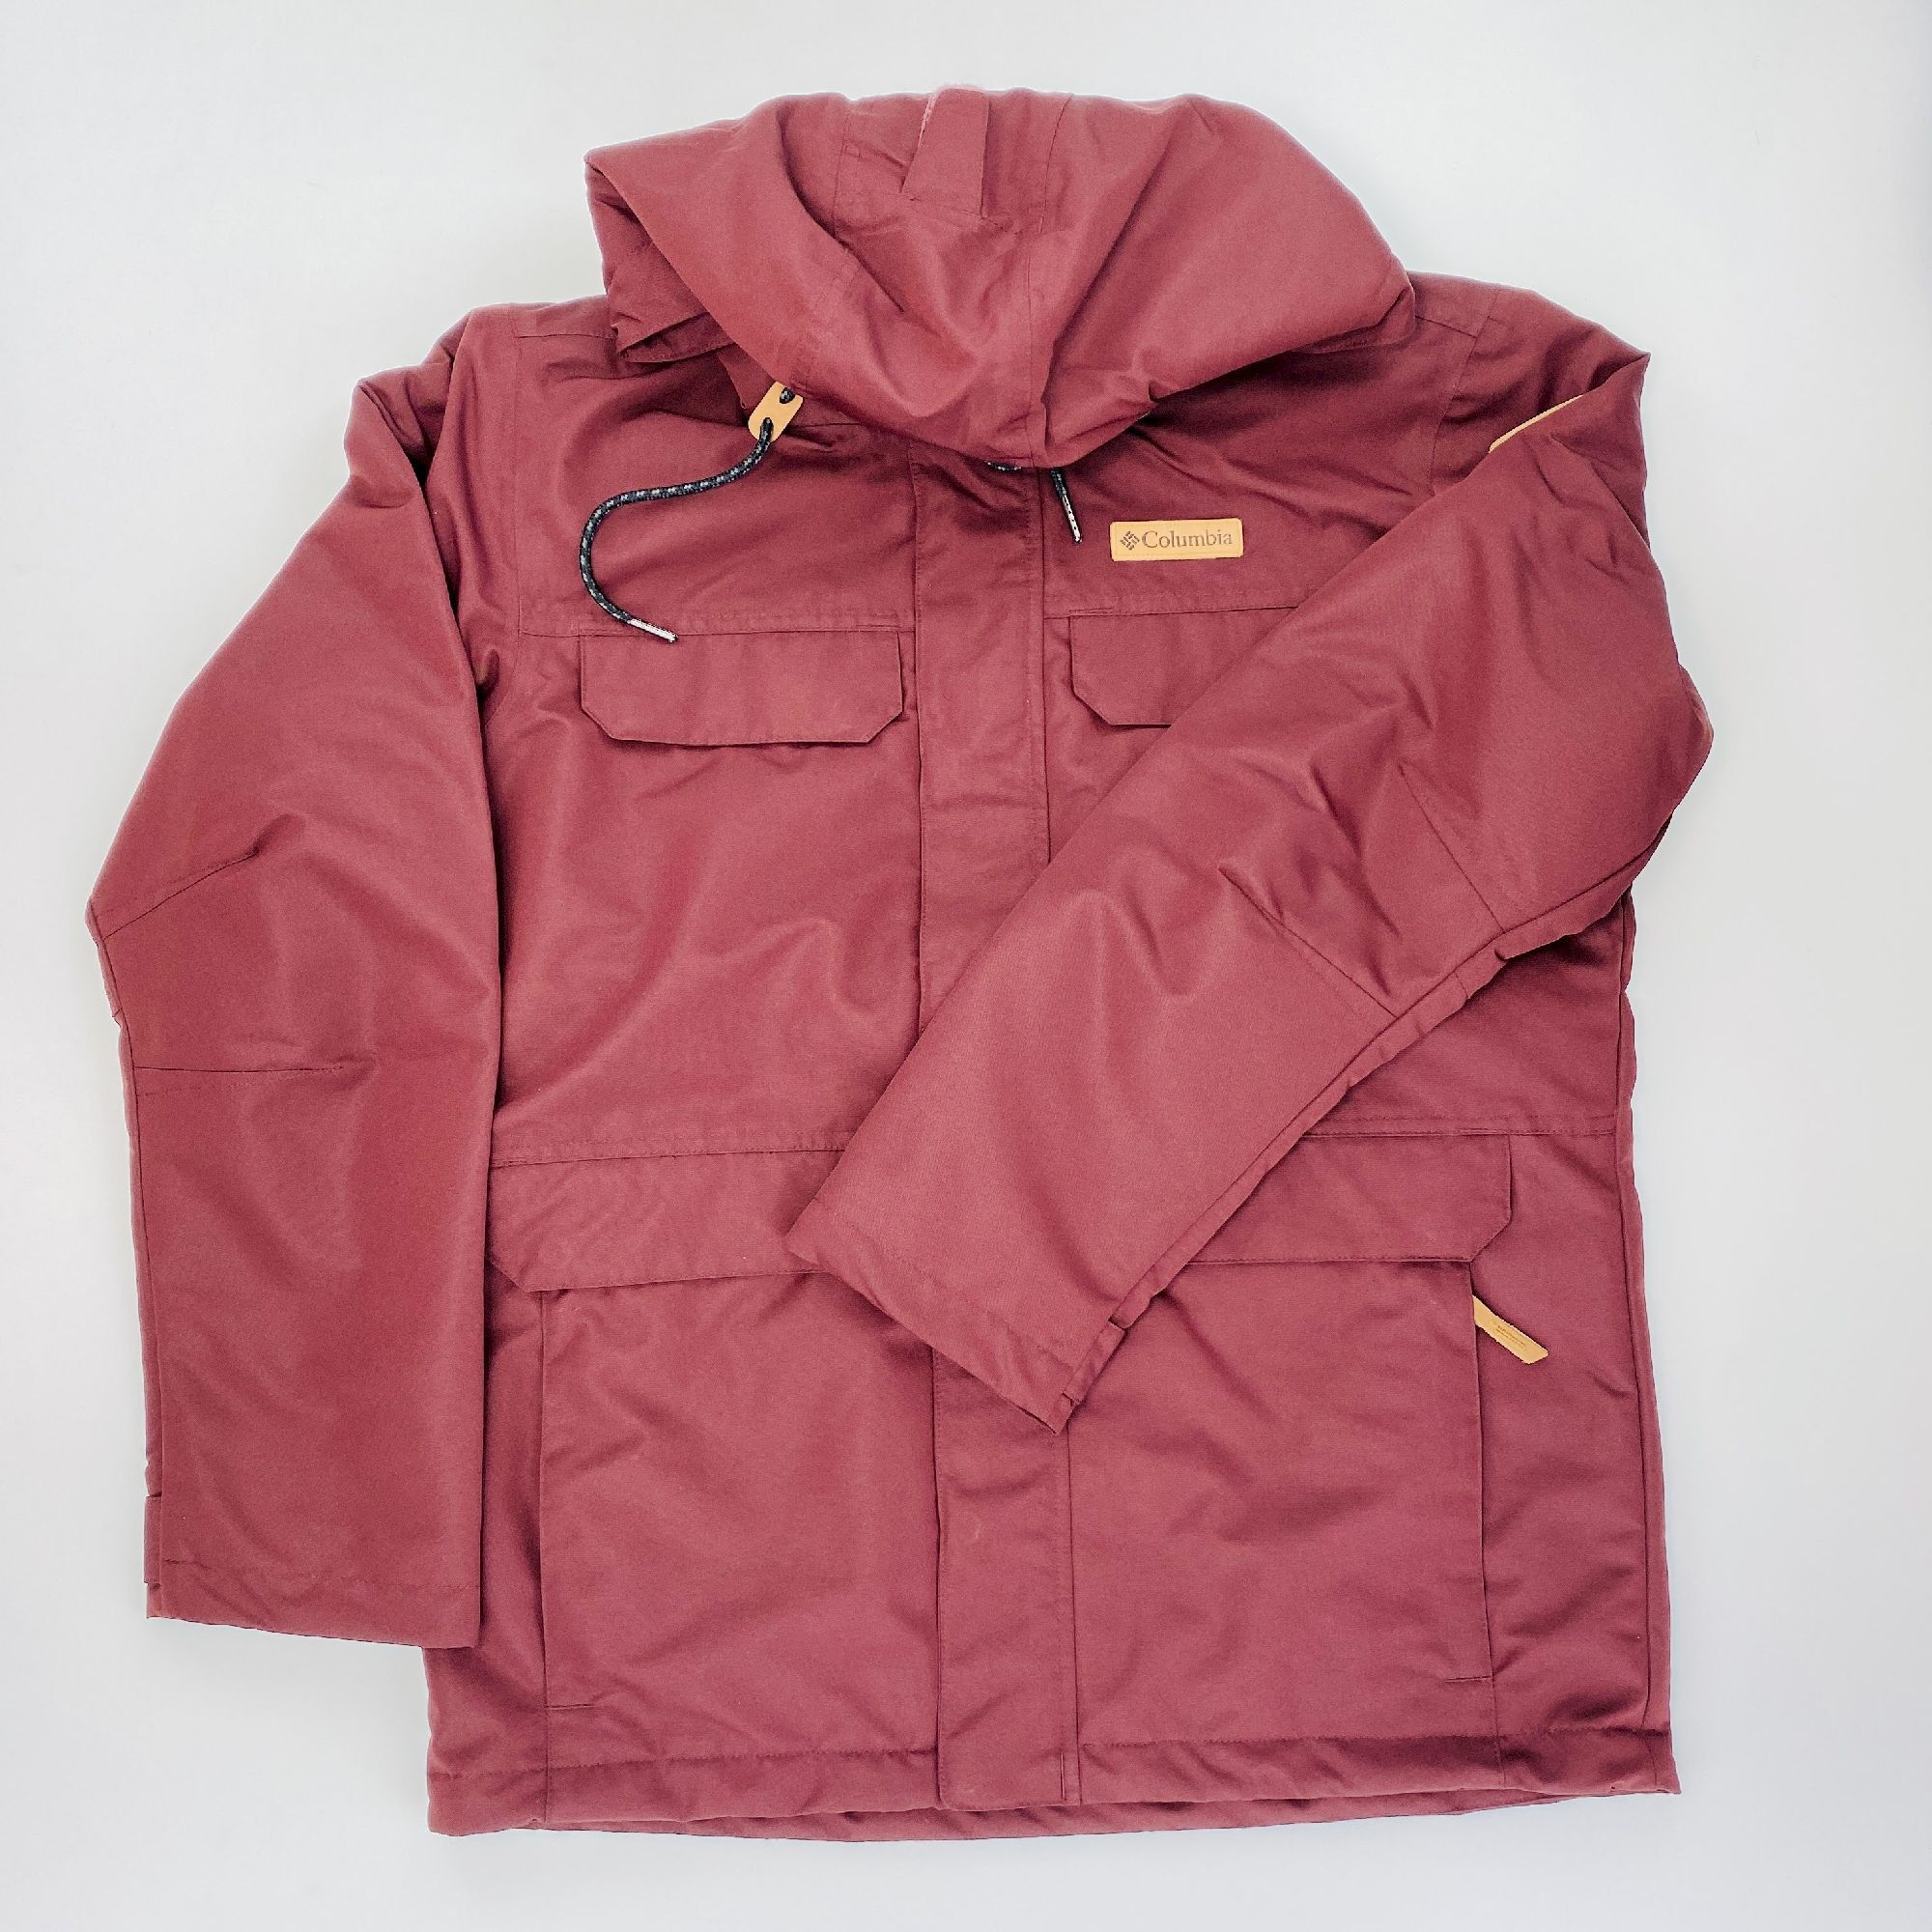 Columbia South Canyon™ Lined Jacket - Second Hand Jacke - Herren - Rot - M | Hardloop